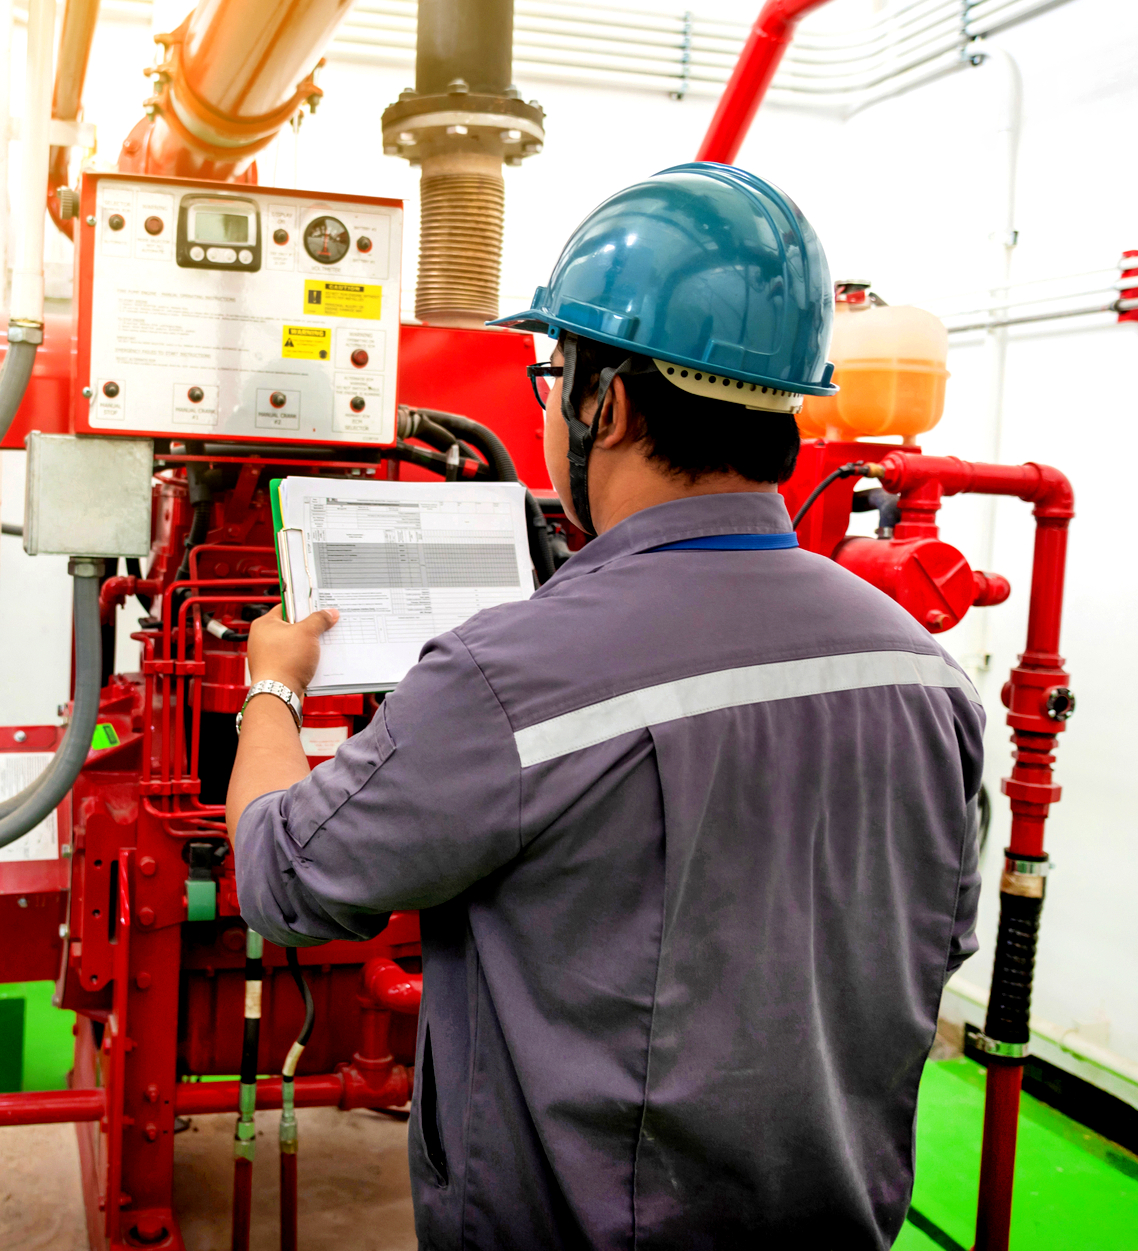 How Often Should Your Fire Sprinkler Systems Be Inspected And Tested? 